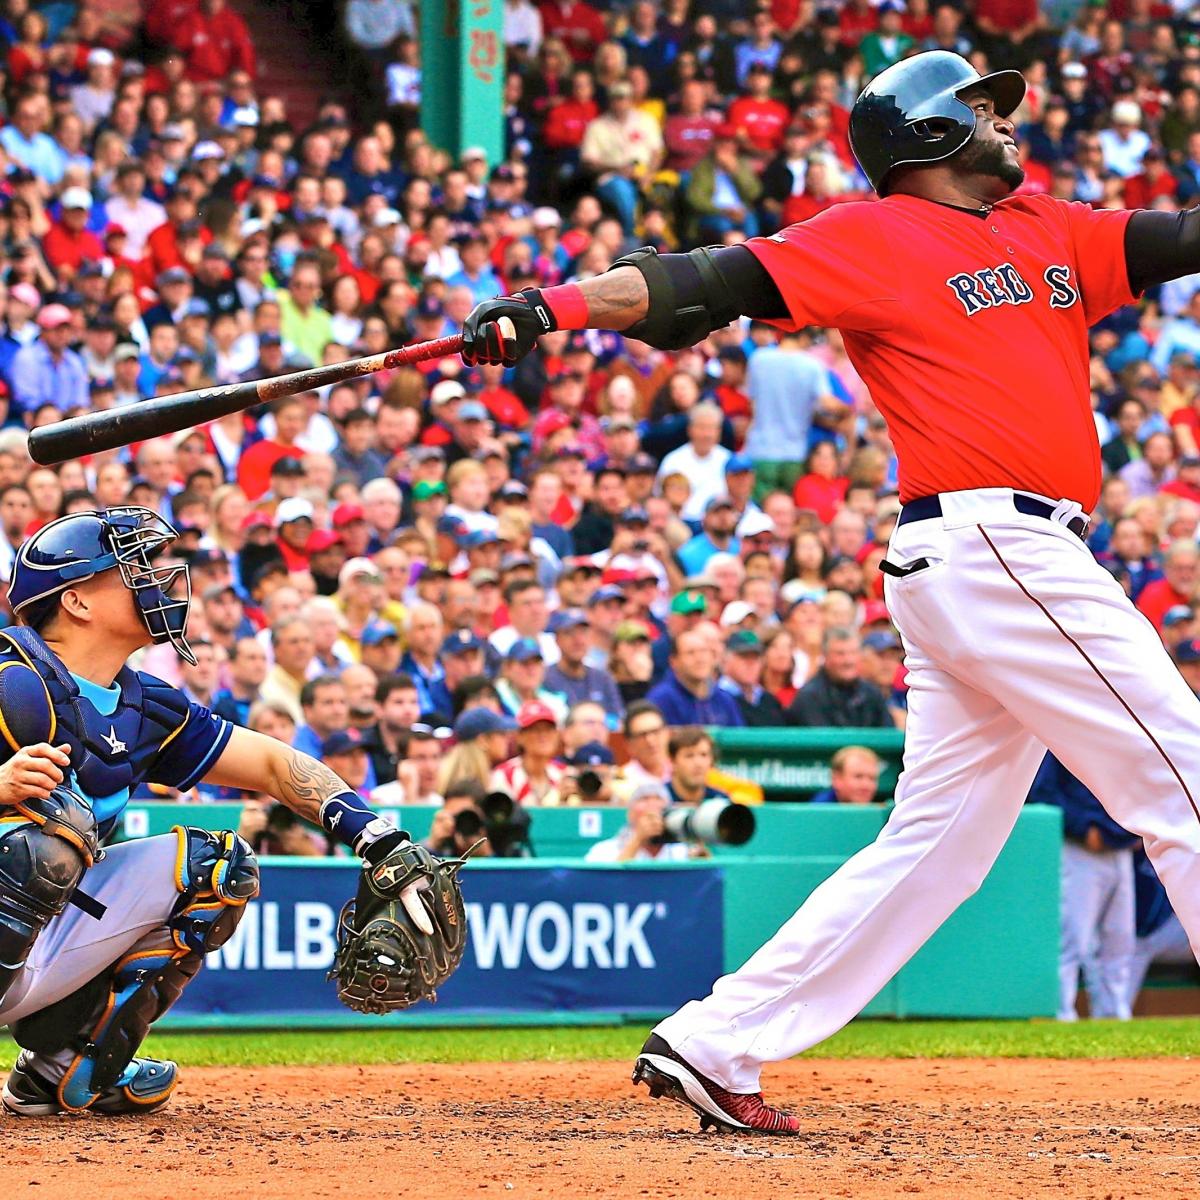 Tampa Bay Rays vs. Boston Red Sox Game 1 Live Score and ALDS